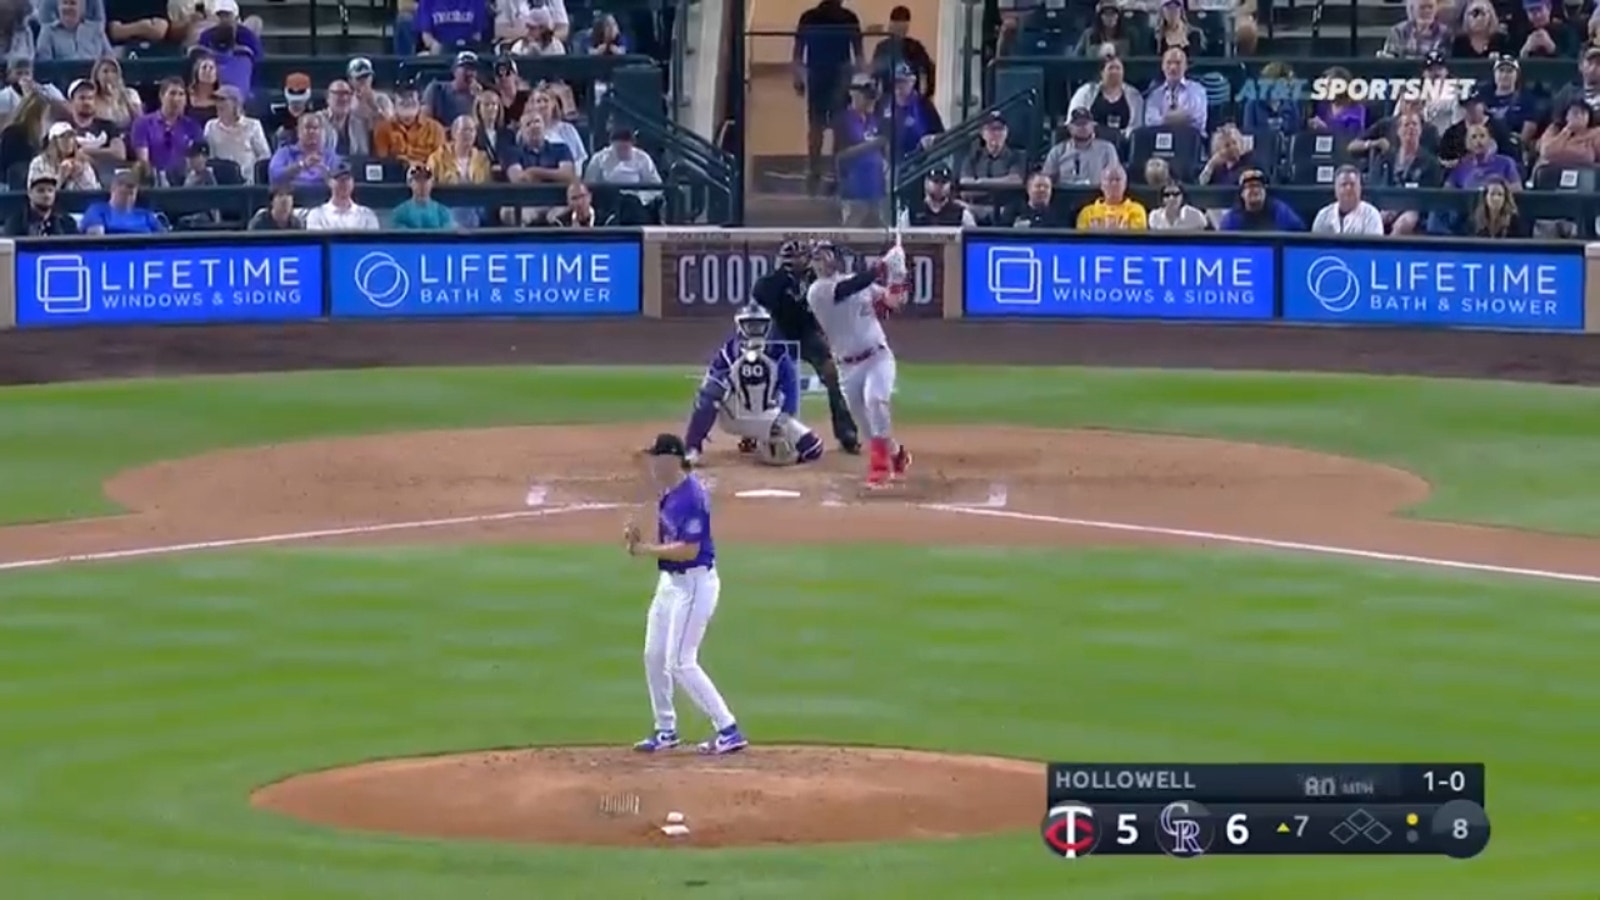 Highlights from Twins' 7-6 win vs. Rockies on Friday